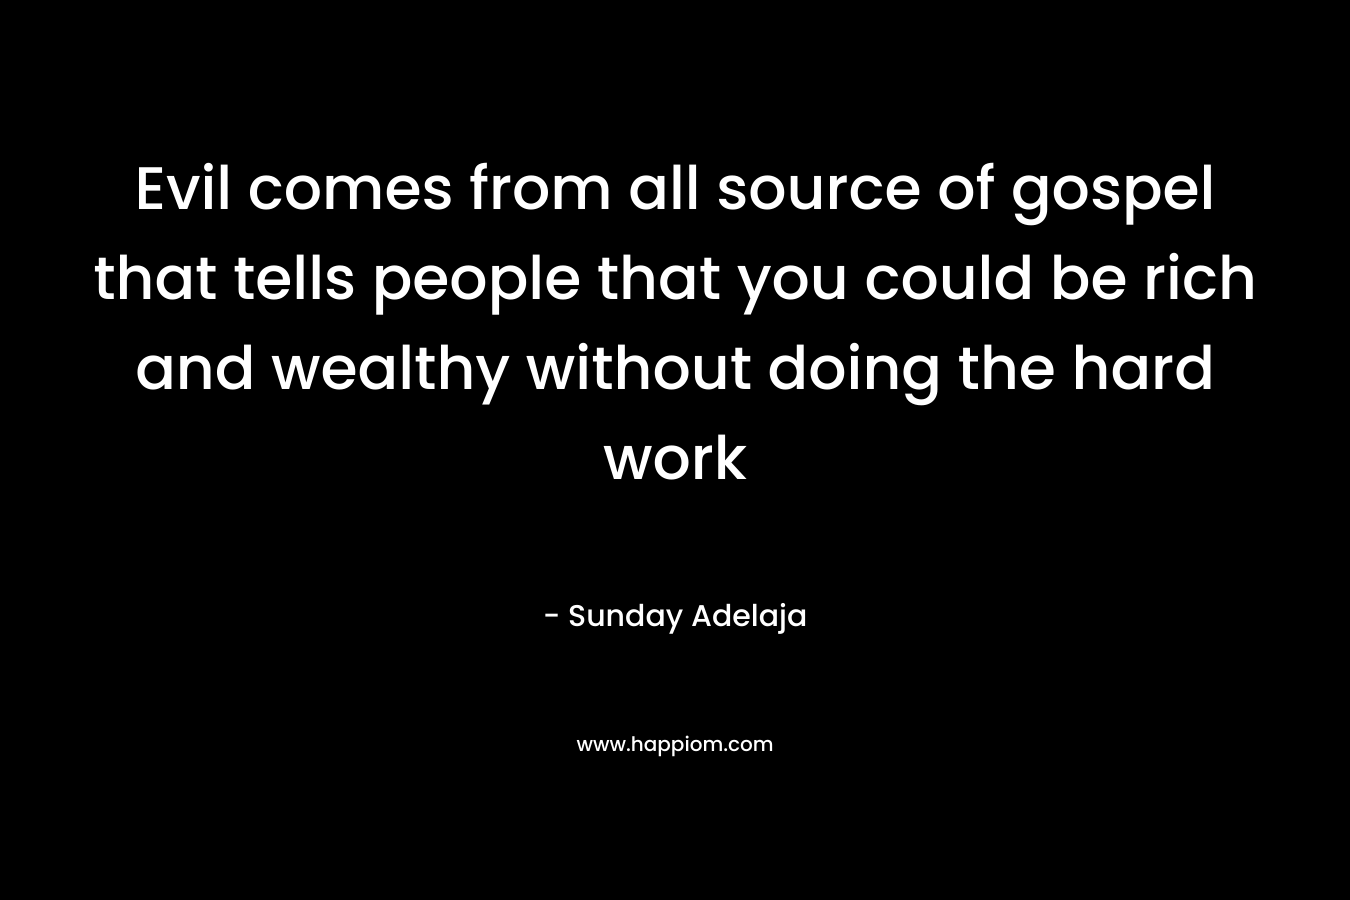 Evil comes from all source of gospel that tells people that you could be rich and wealthy without doing the hard work – Sunday Adelaja